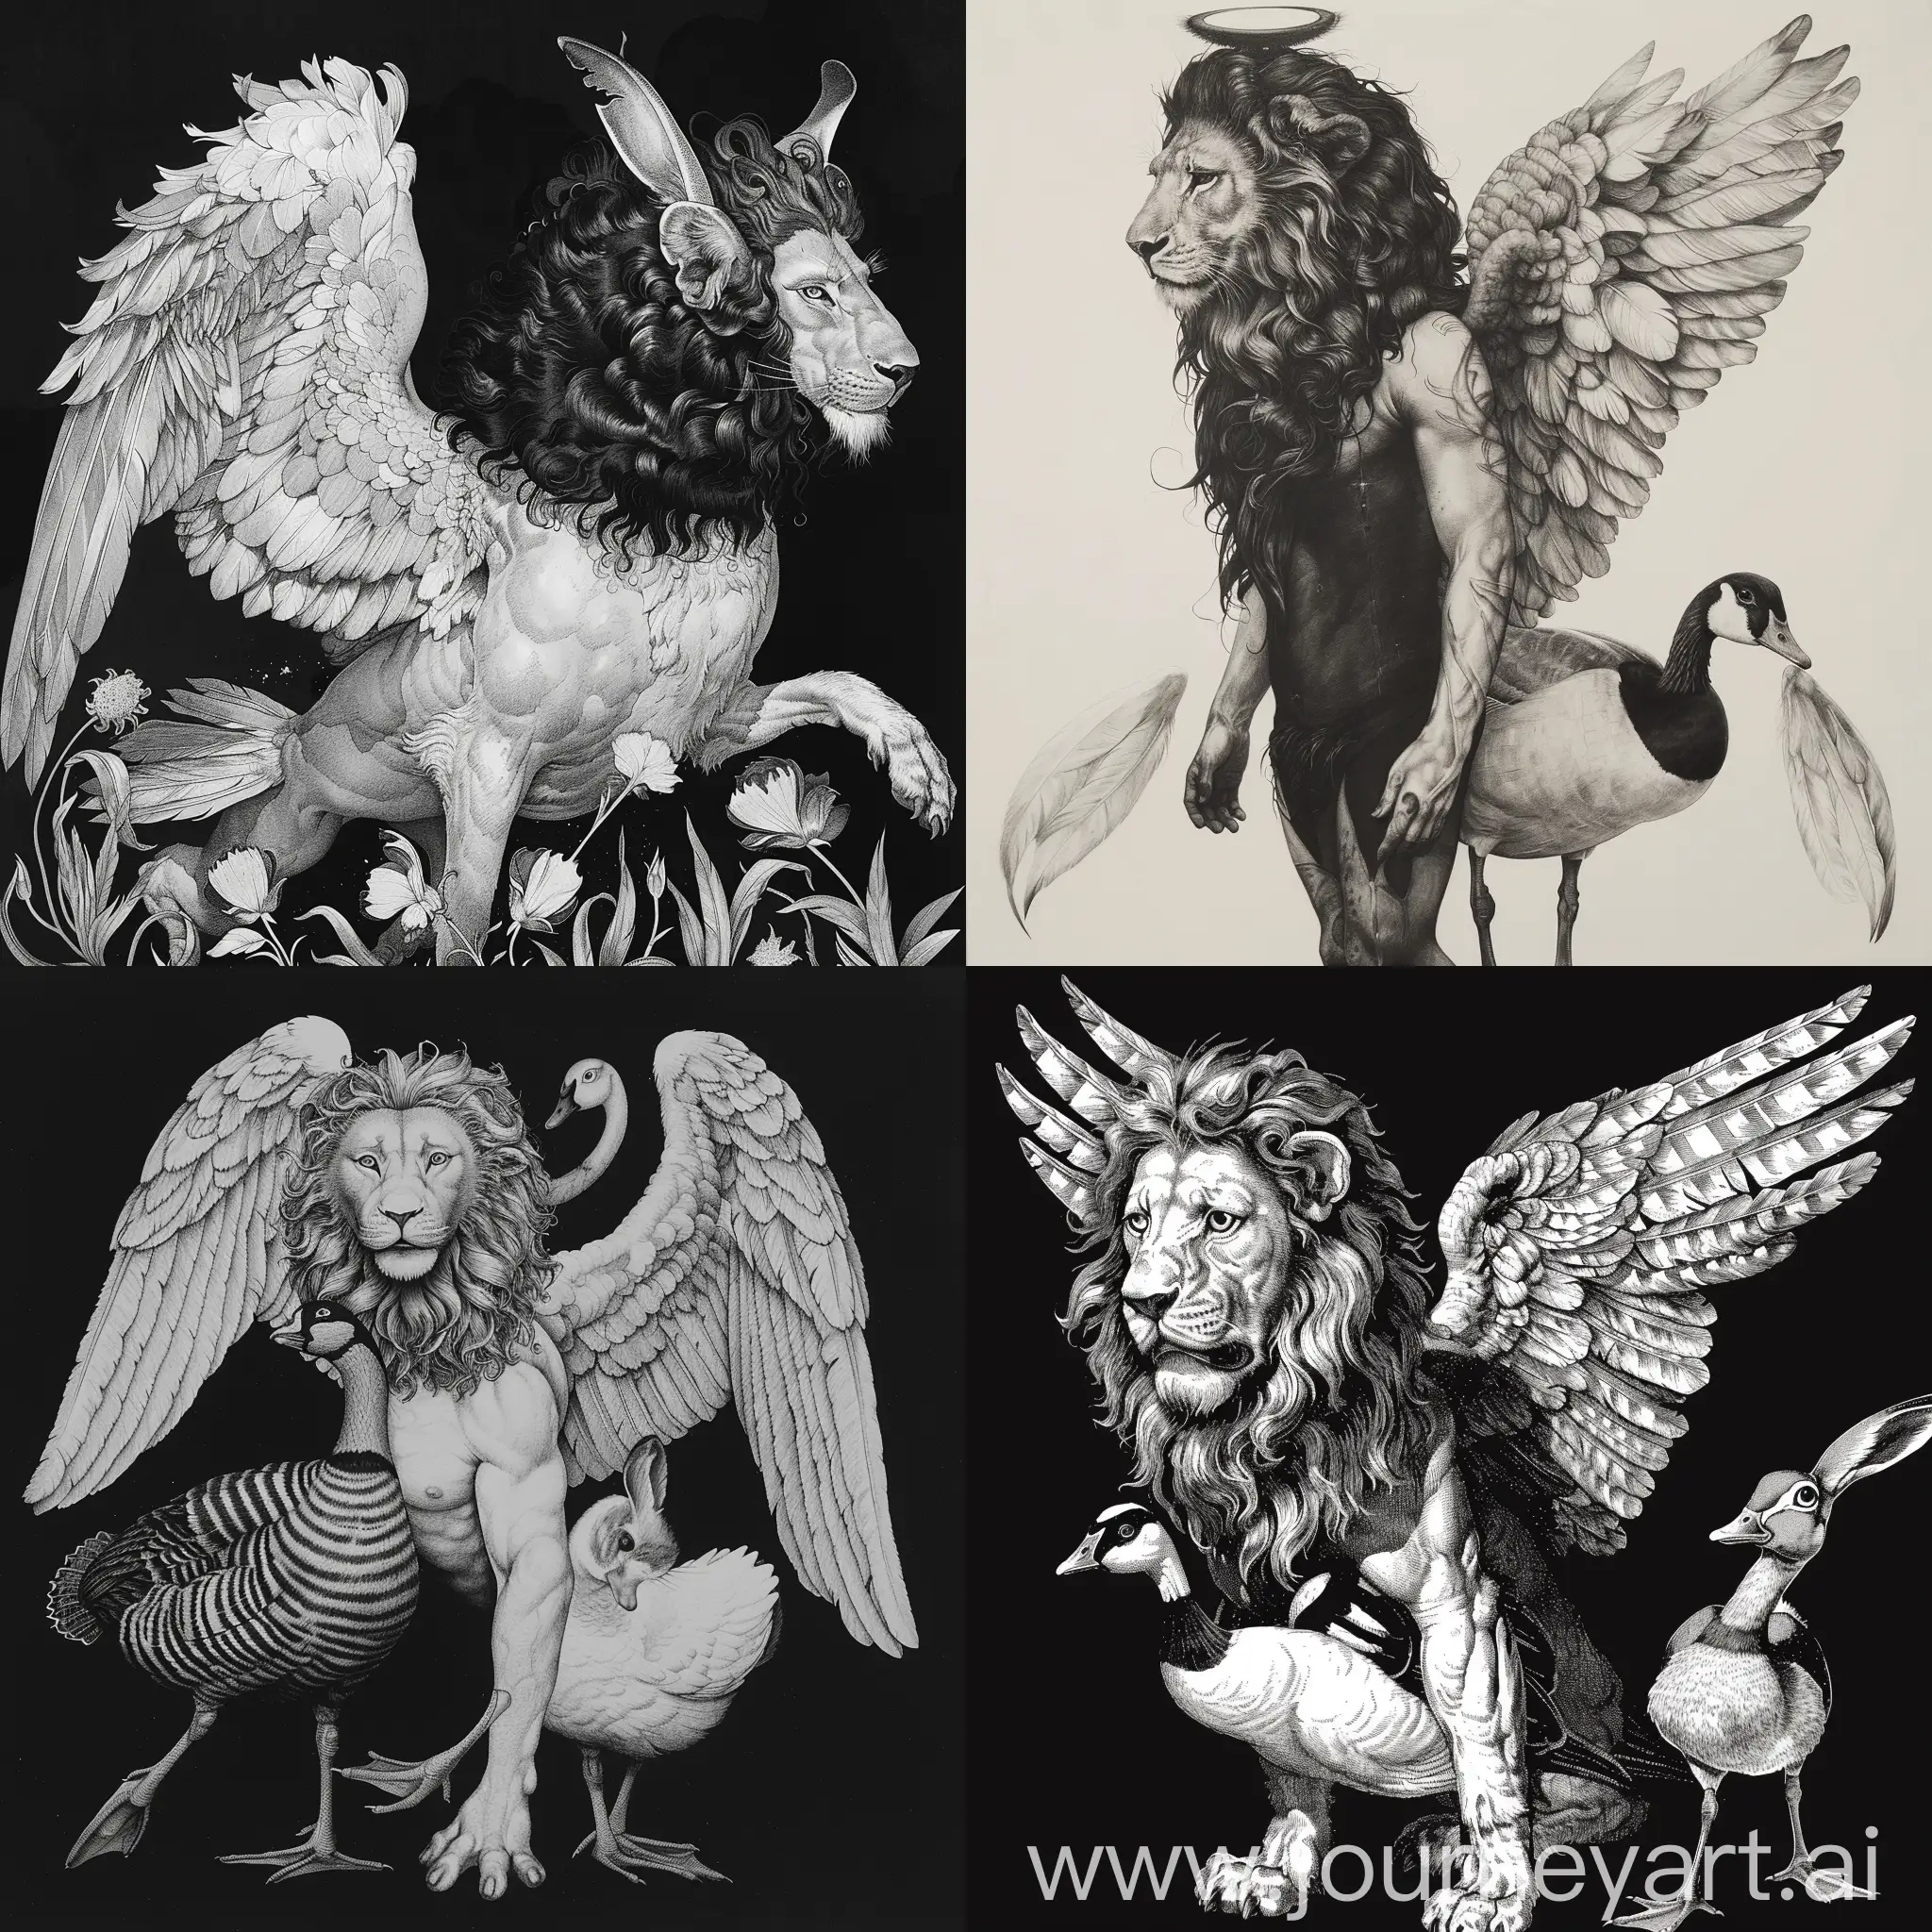 Surreal-Composition-Hybrid-Angel-with-Lion-Head-Goose-Legs-and-Hare-Tail